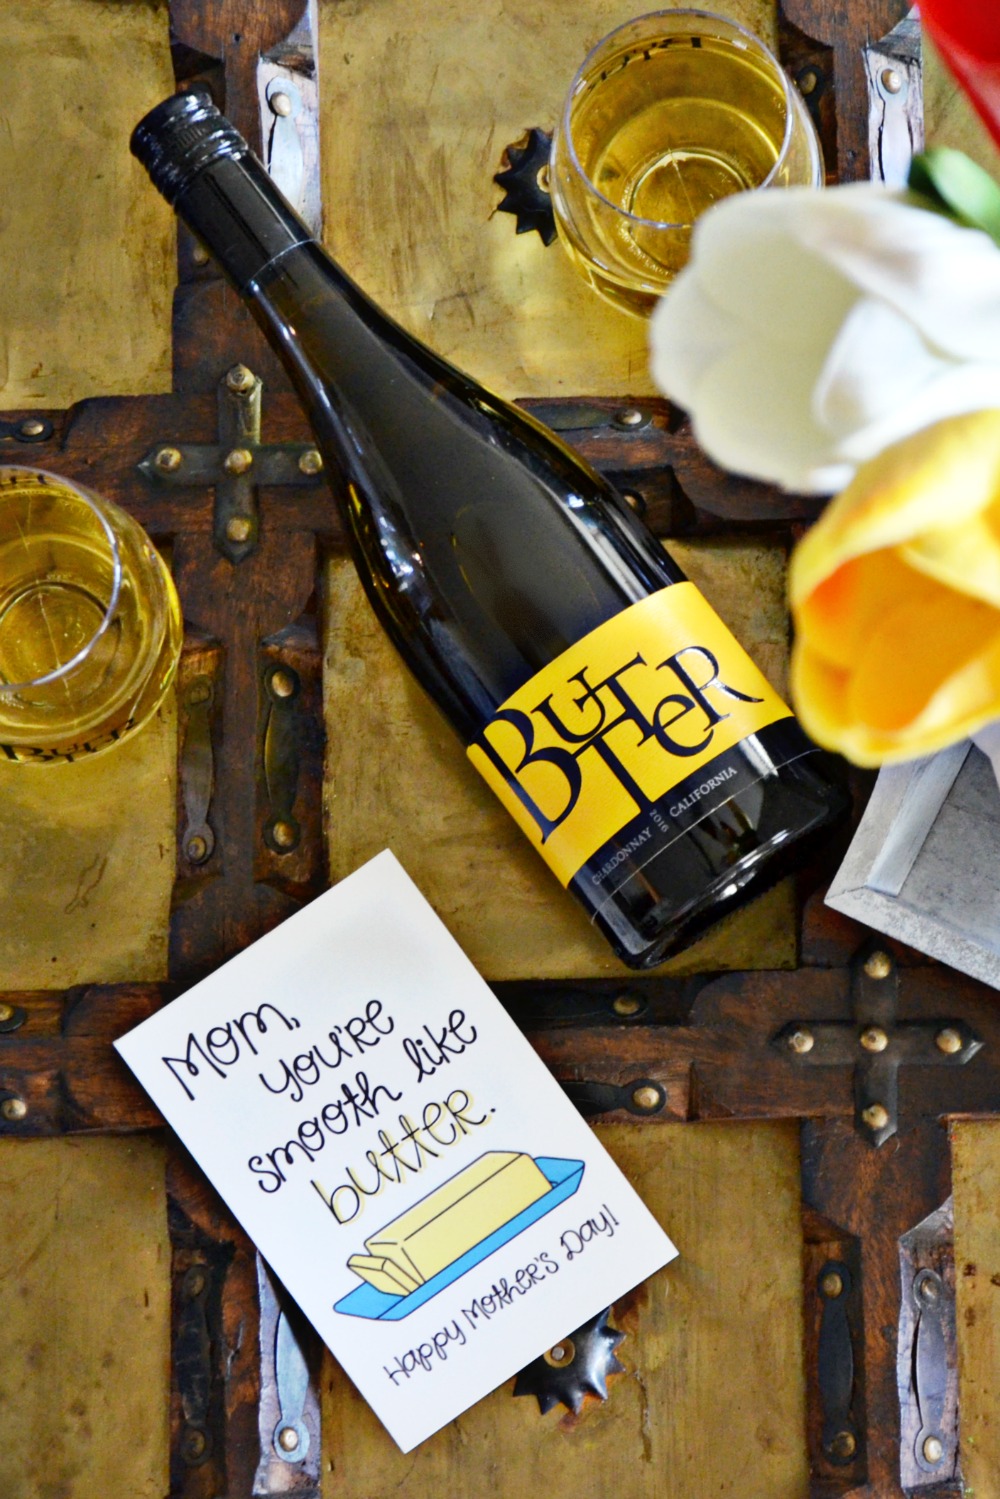 Butter Chardonnay is great for all occasions but makes the best way to celebrate motherhood with your favorite moms on Mother's Day.